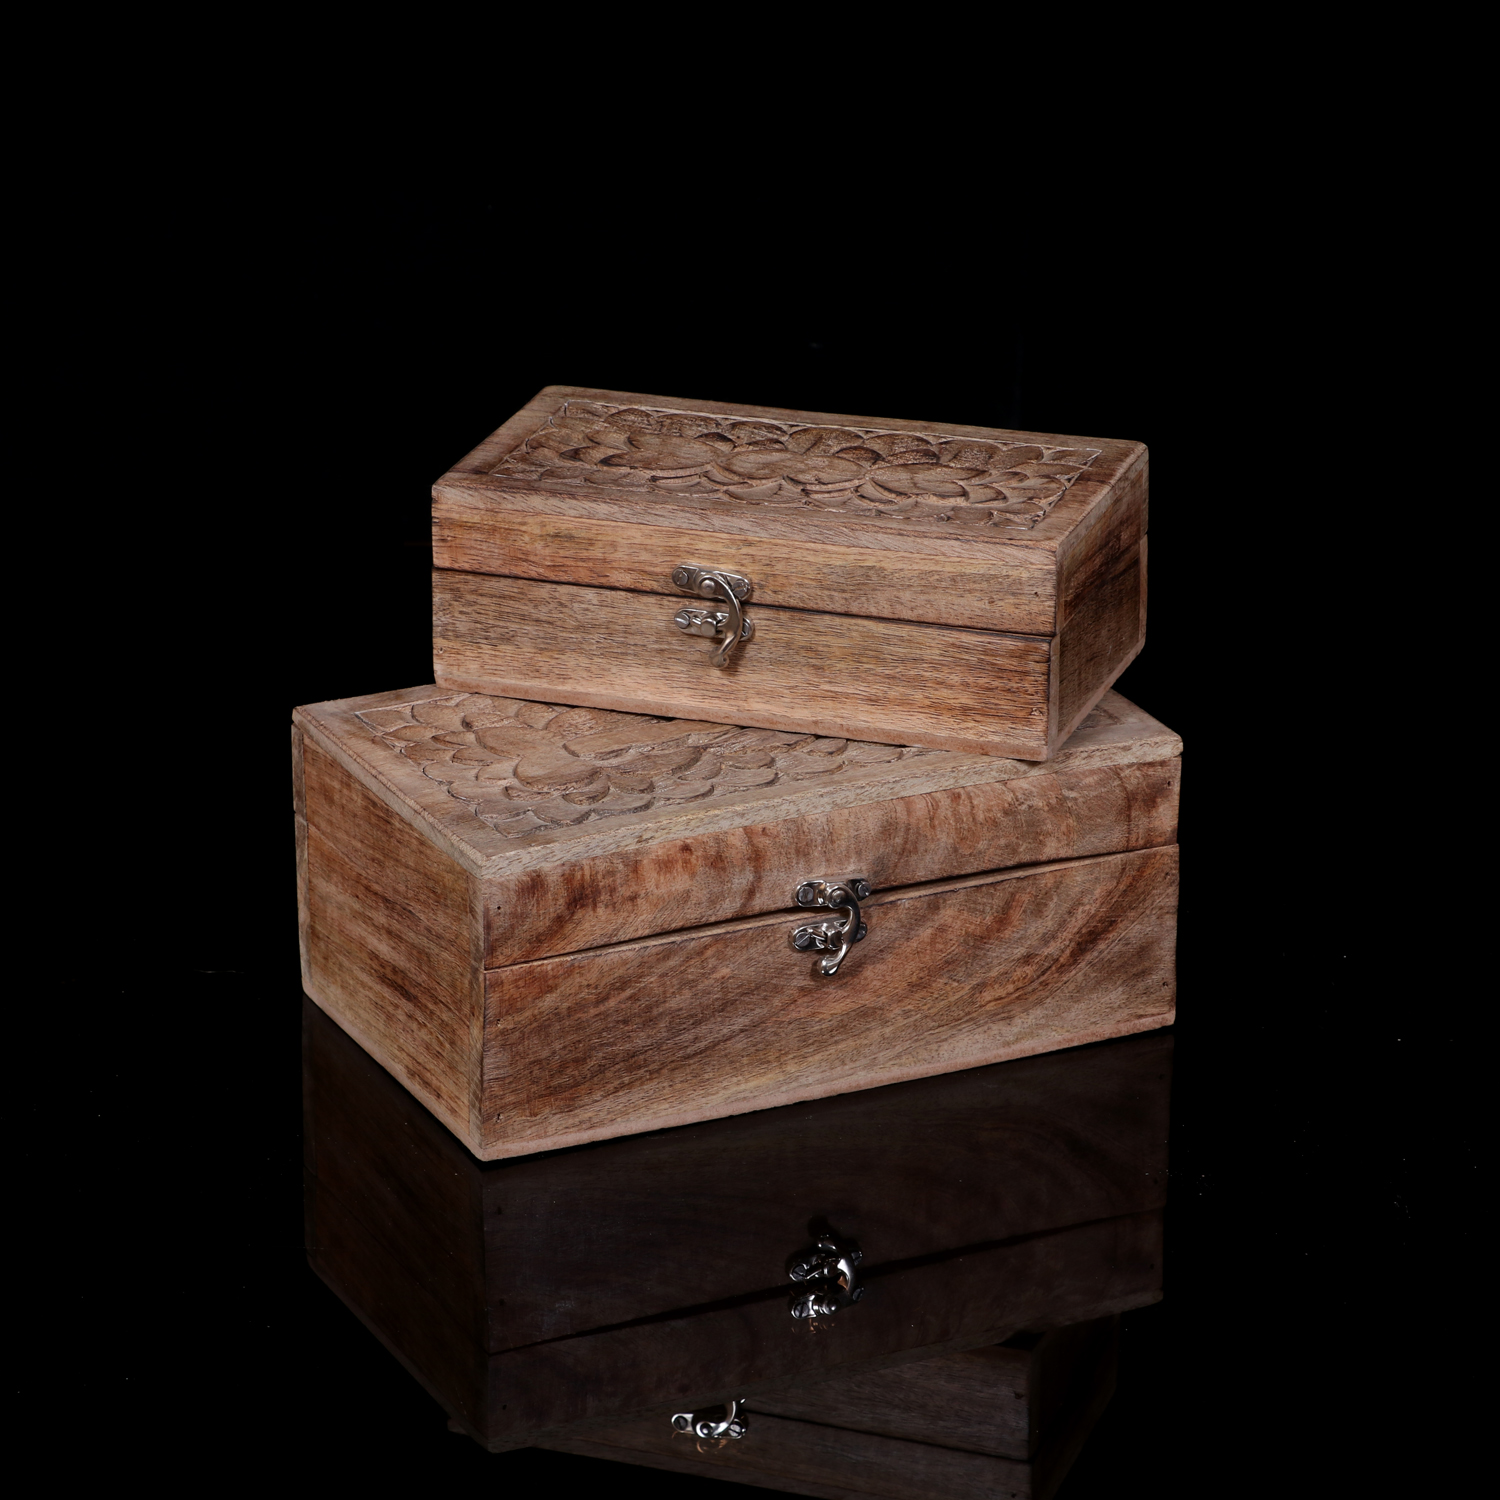 Wooden Carved Box Set Of 2